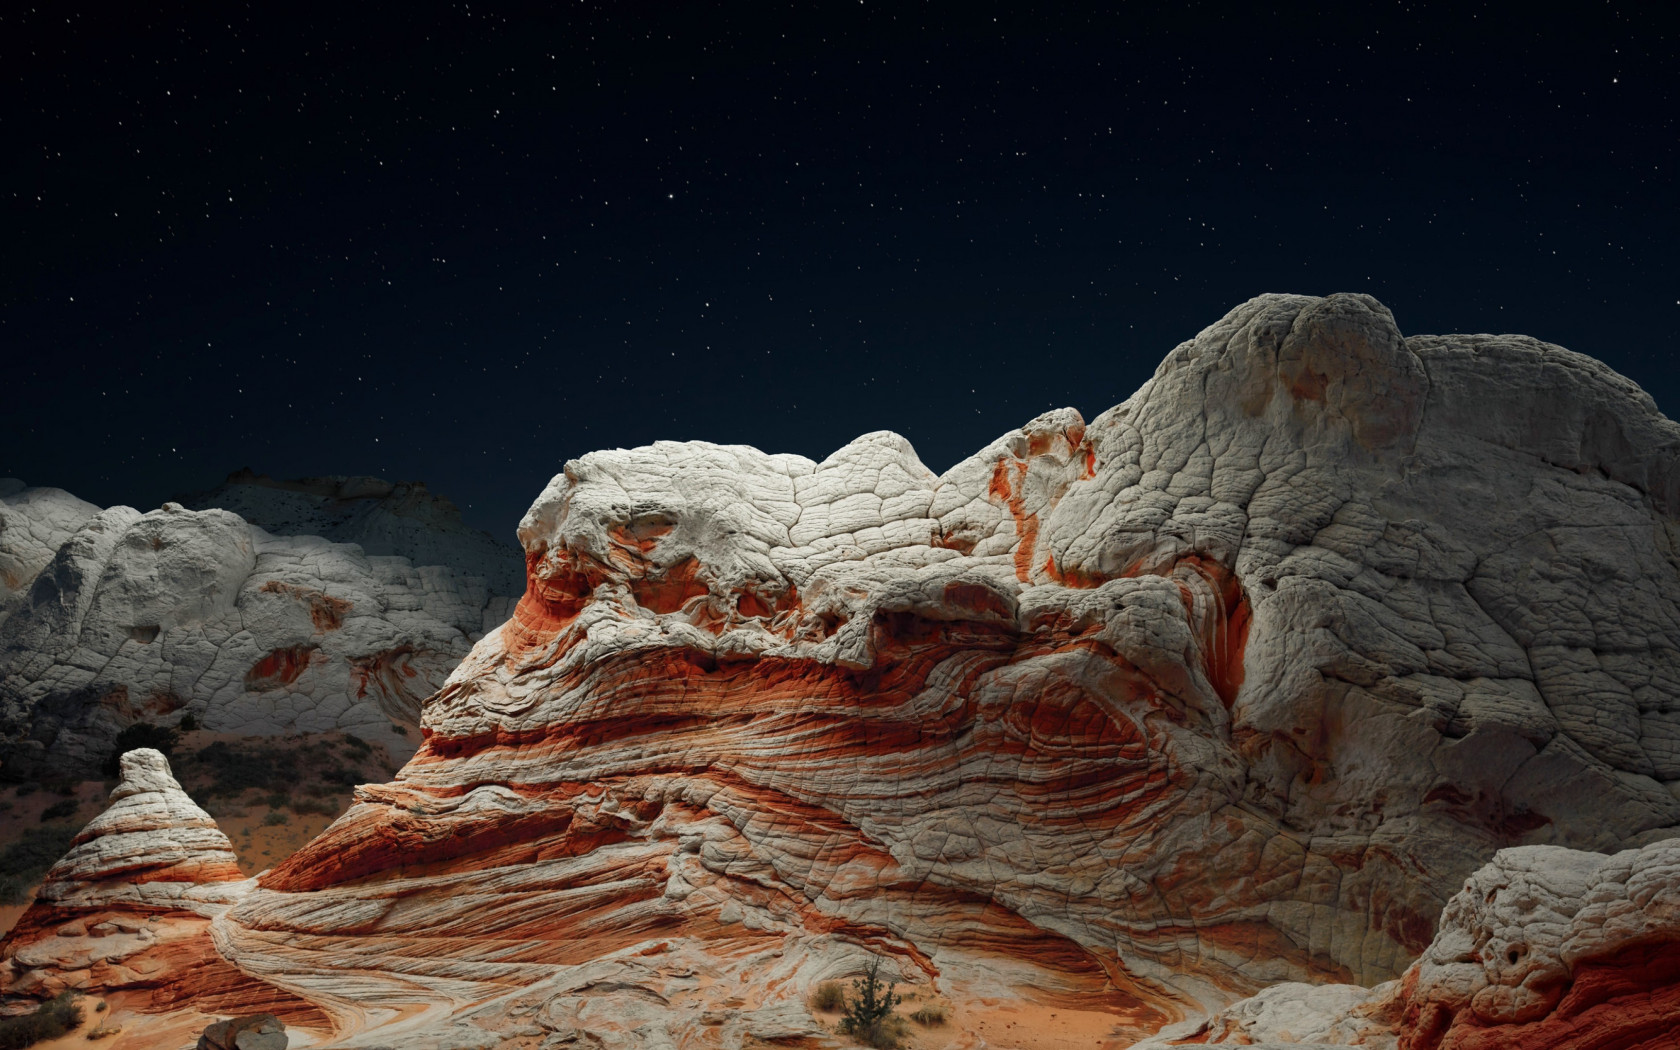 The night sky and desert valley wallpaper 1680x1050